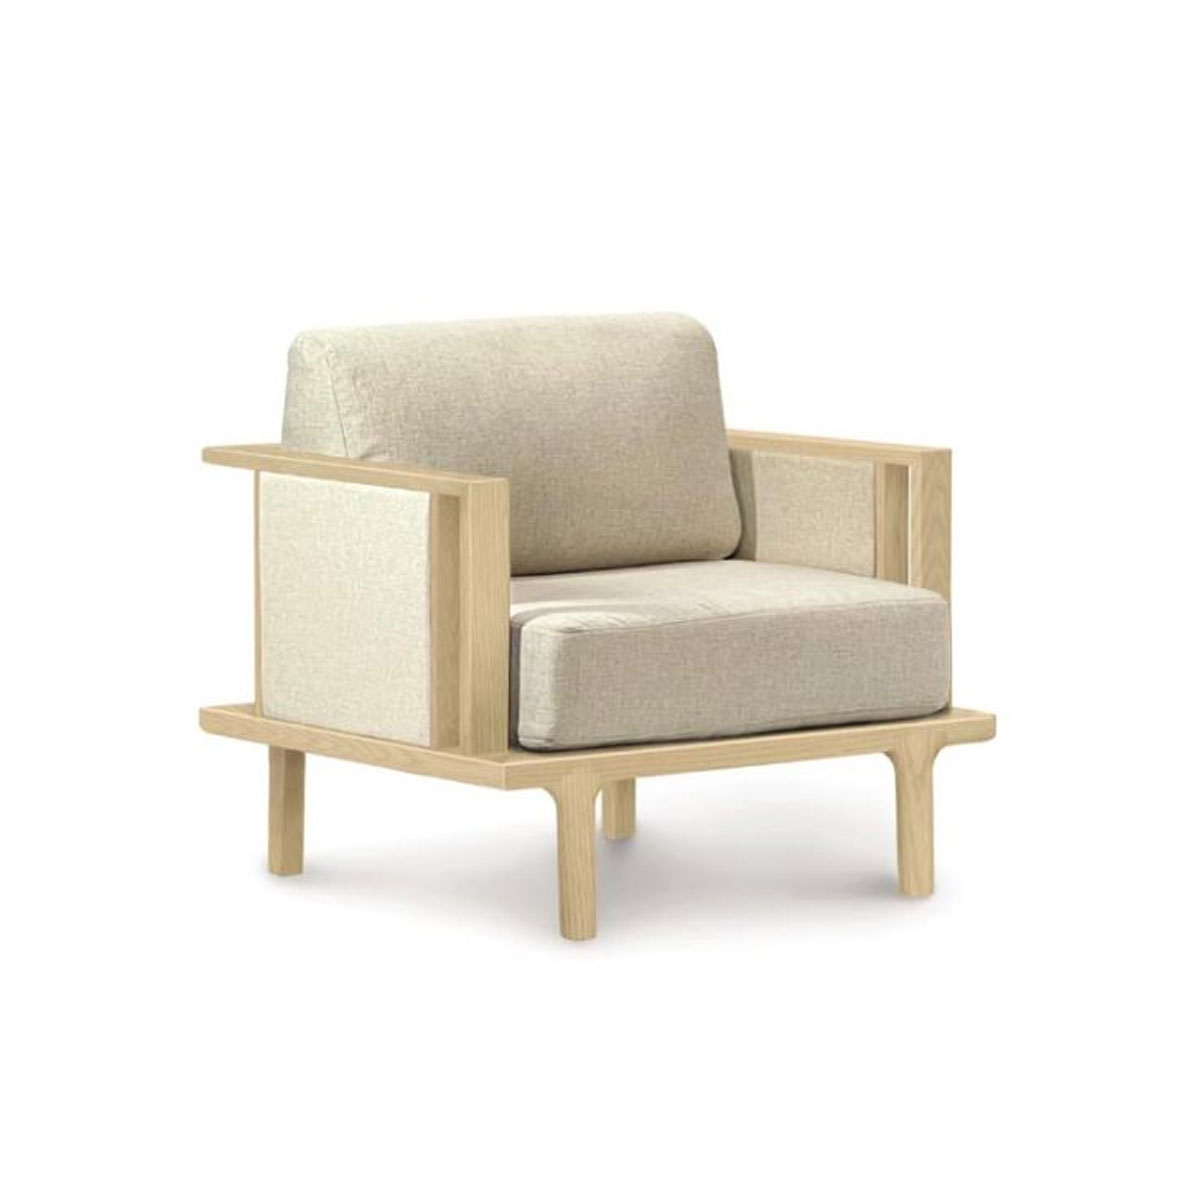 Copeland Sierra Chair with Upholstered Panels in Oak